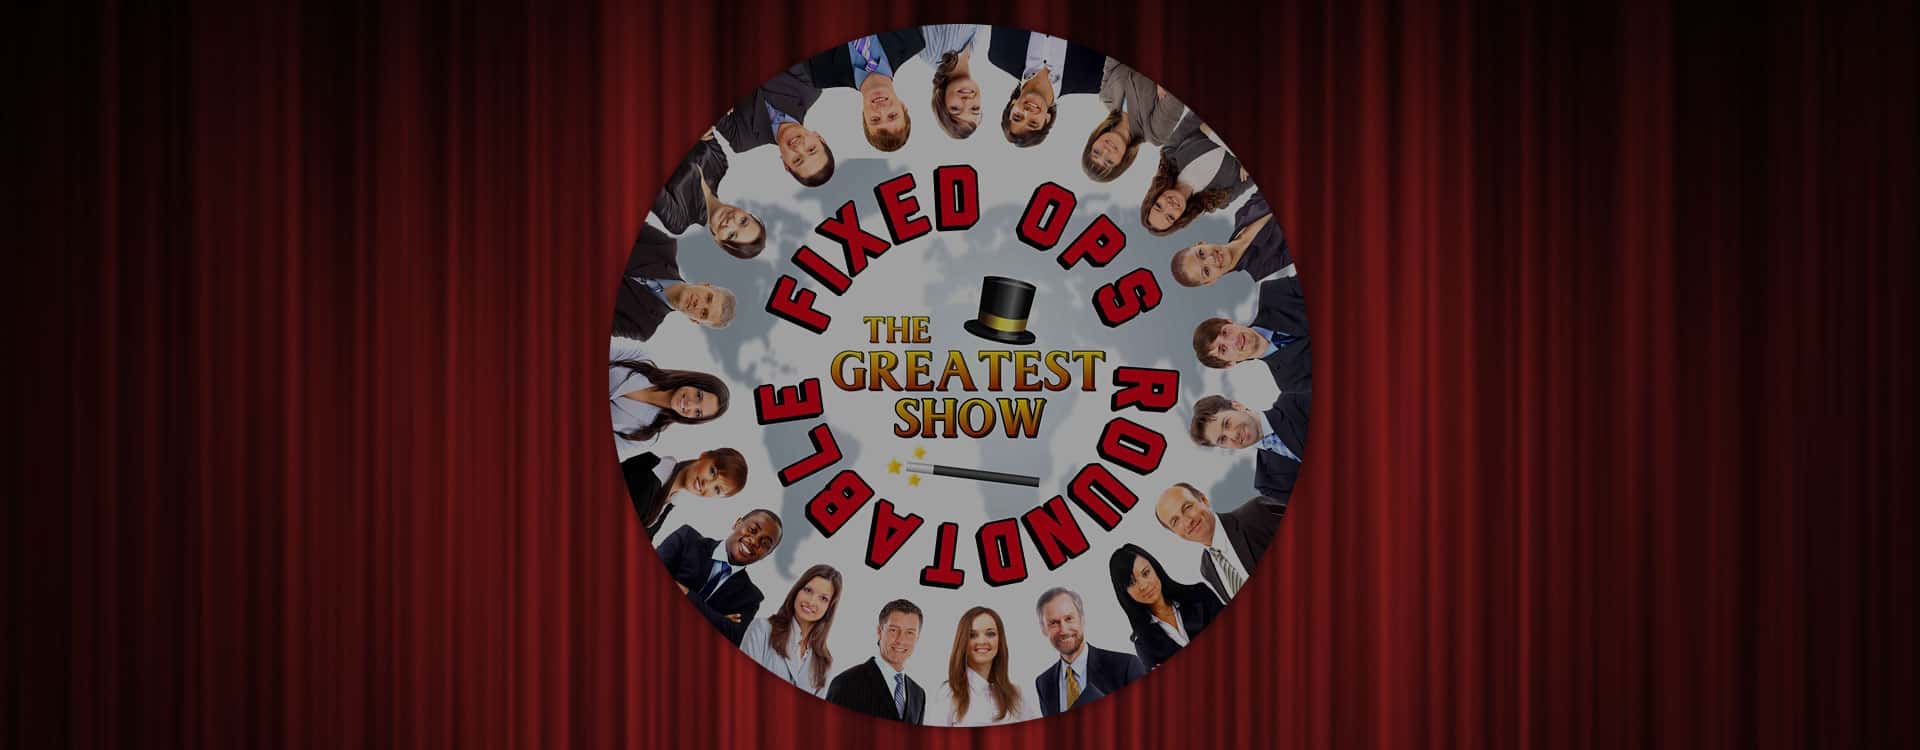 Fixed Ops Roundtable The Greatest Show